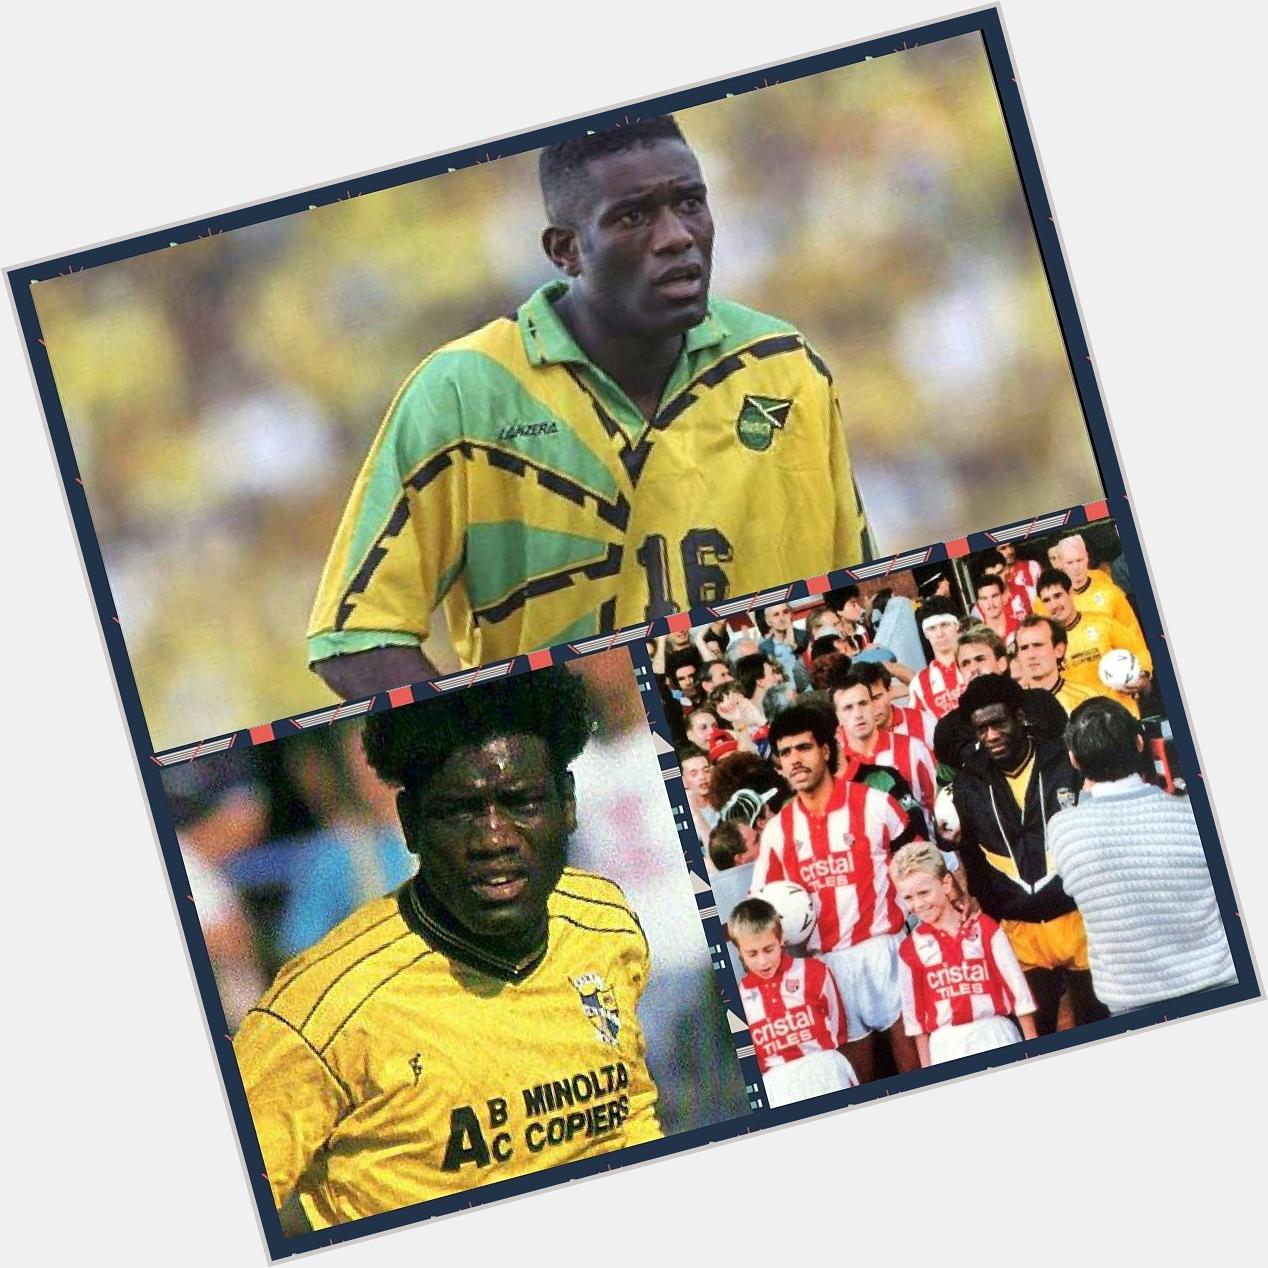 Bit late in the day but happy 50th birthday to Robbie Earle! Vale Legend! 